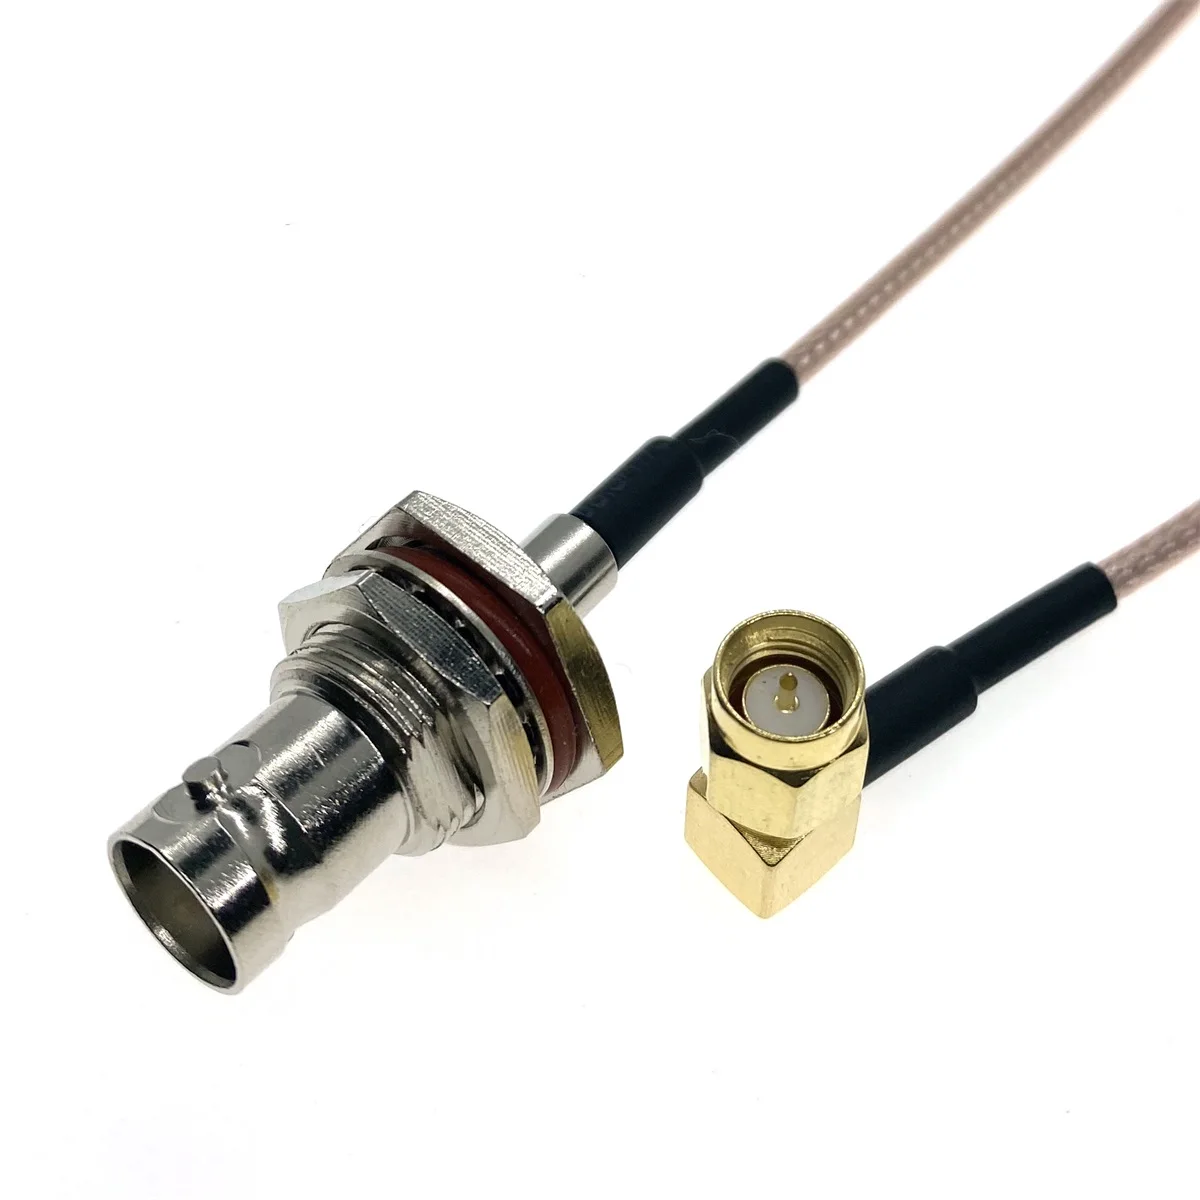 

RG316 SMA MALE Right Angle to BNC Female Jack Bulkhead 50 Ohm RF Coax Extension Cable Pigtail Coaxial